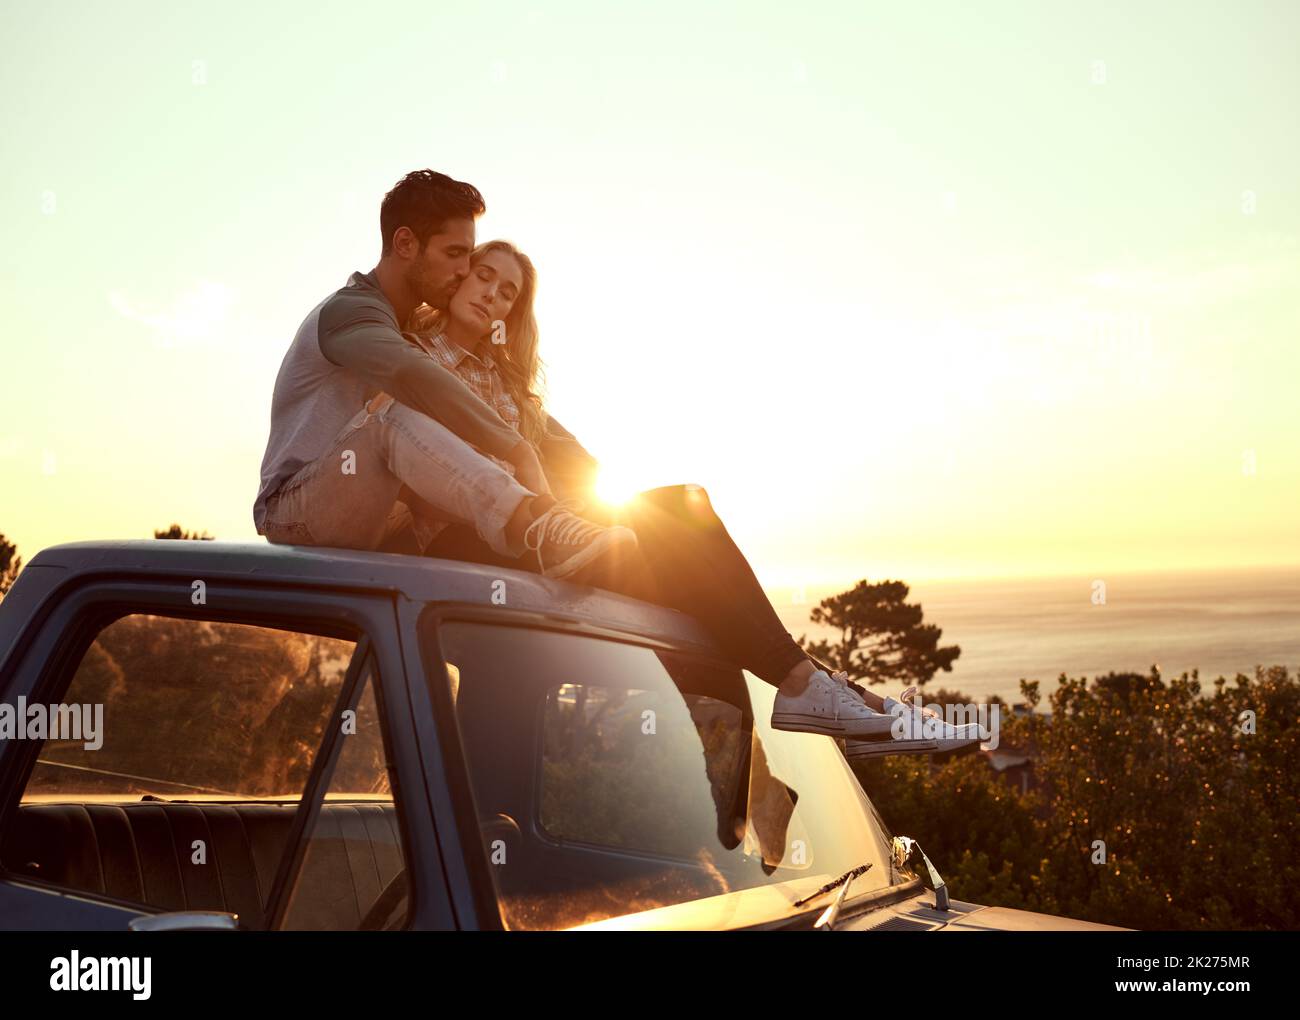 Romance on the road. Shot of an affectionate young couple enjoying a roadtrip together. Stock Photo